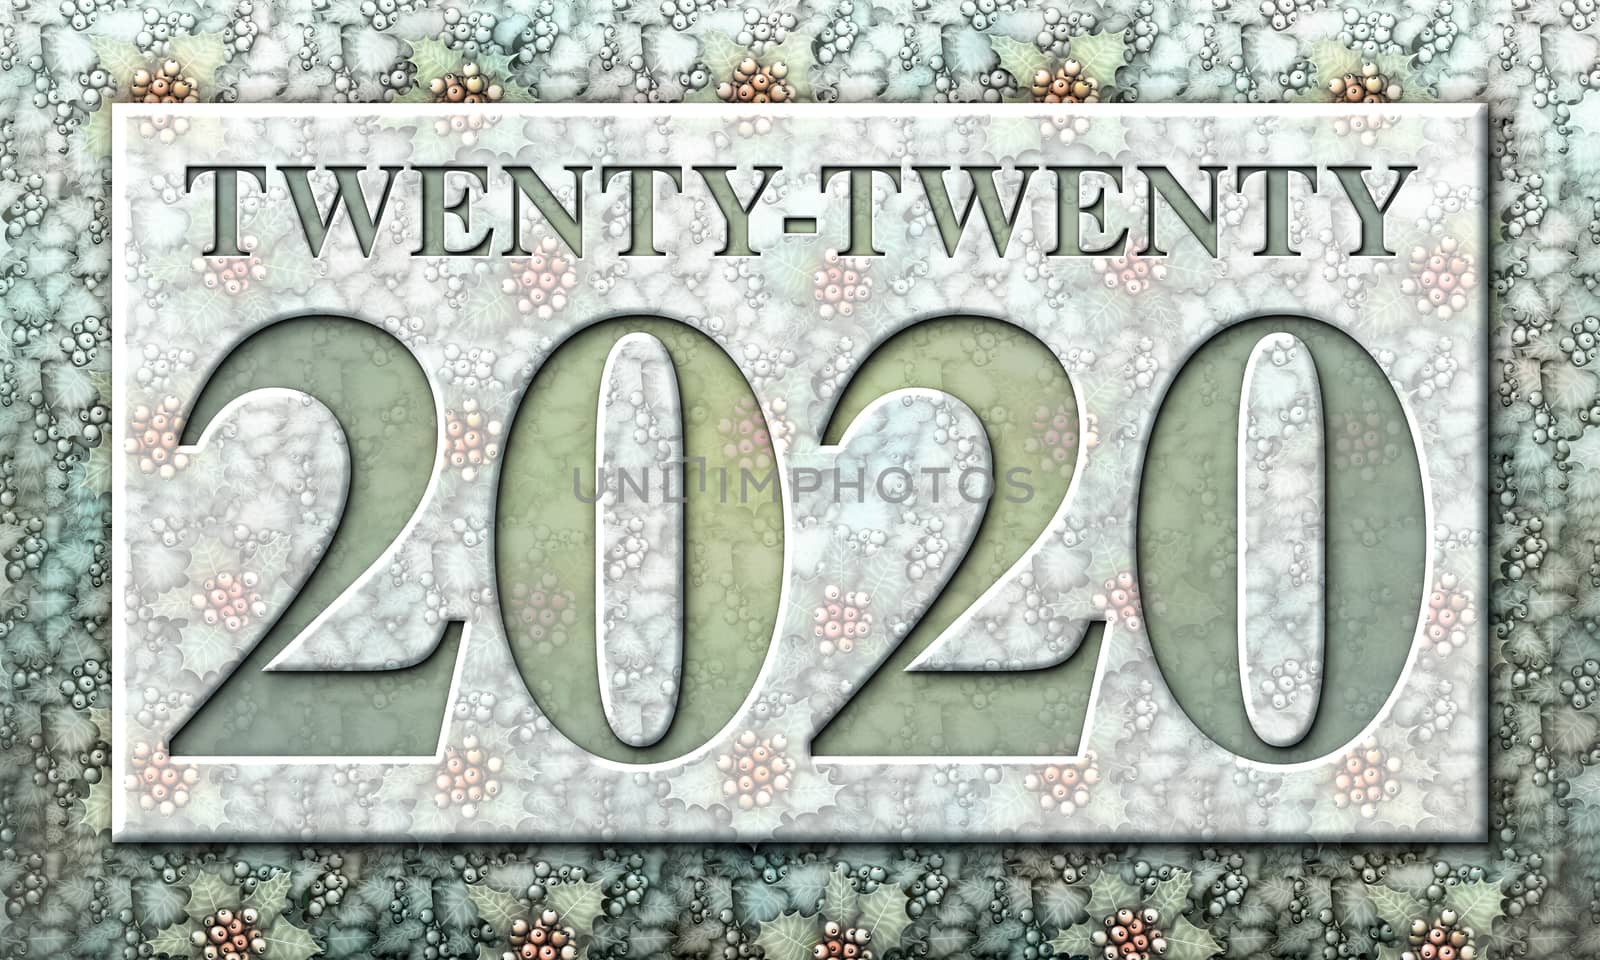 3D illustration of the words Twenty-Twenty and numbers 2020 integrated with a background of Holly plants.